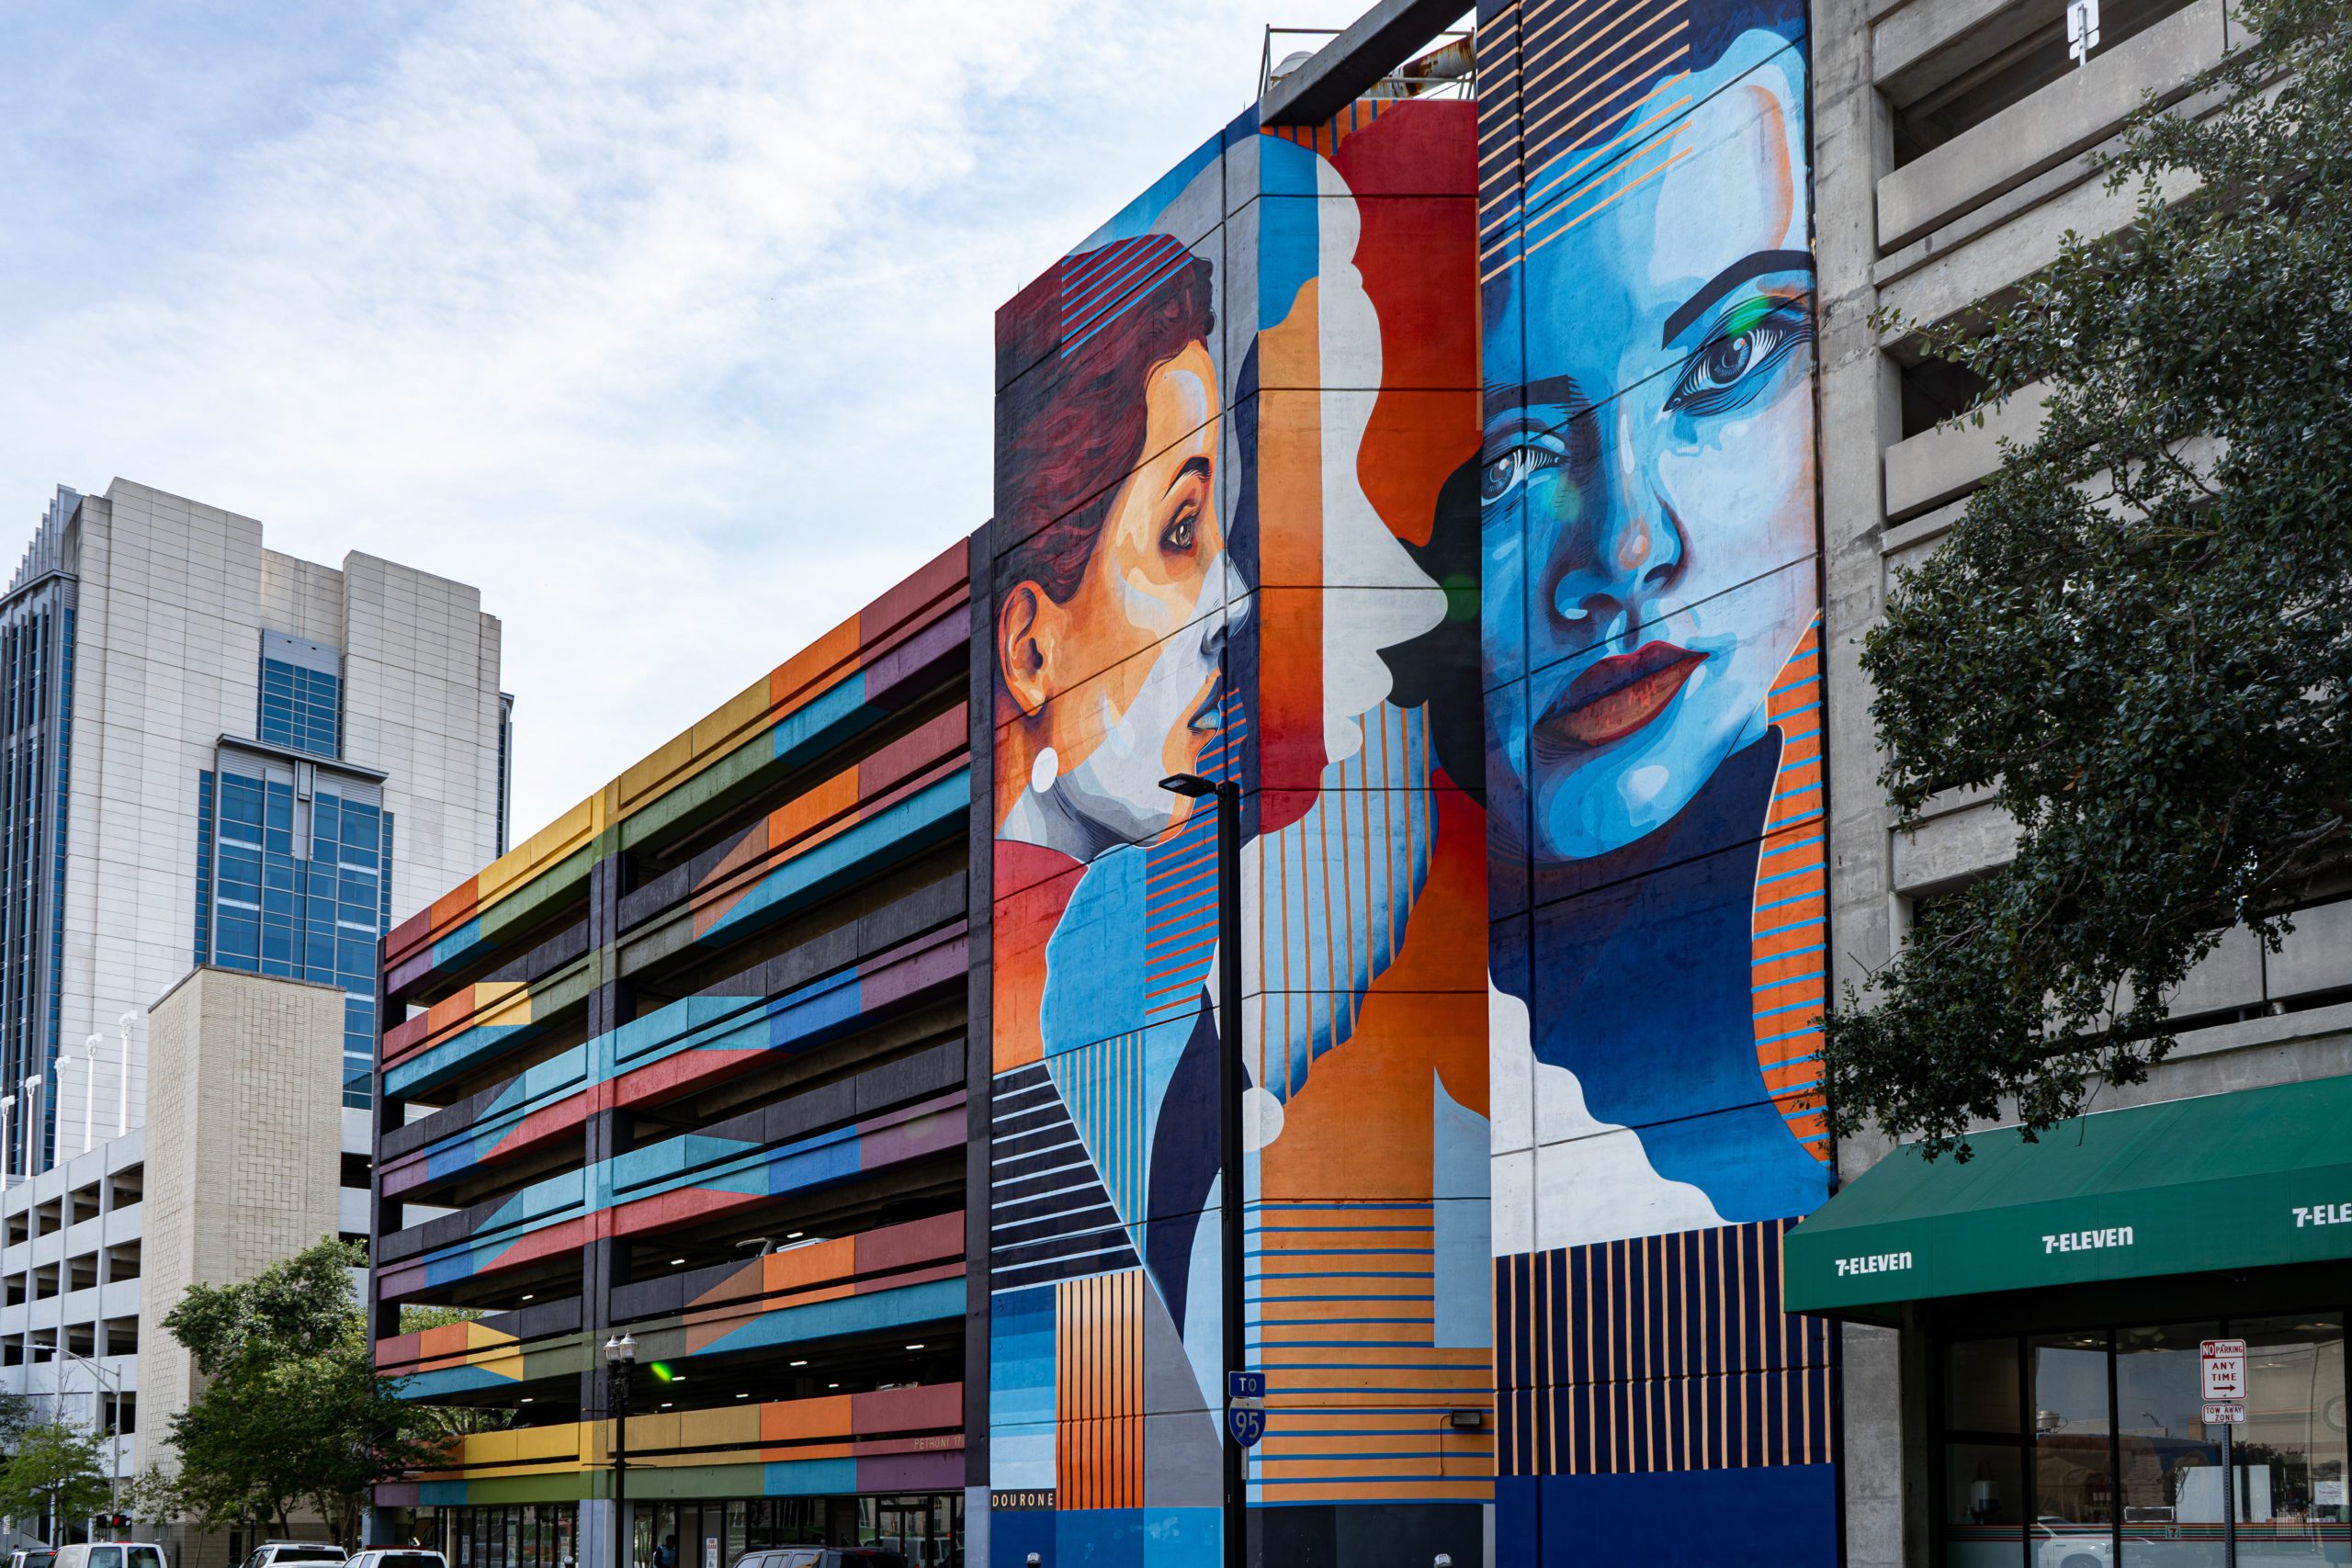 A multi-level parking garage with a painted mural.